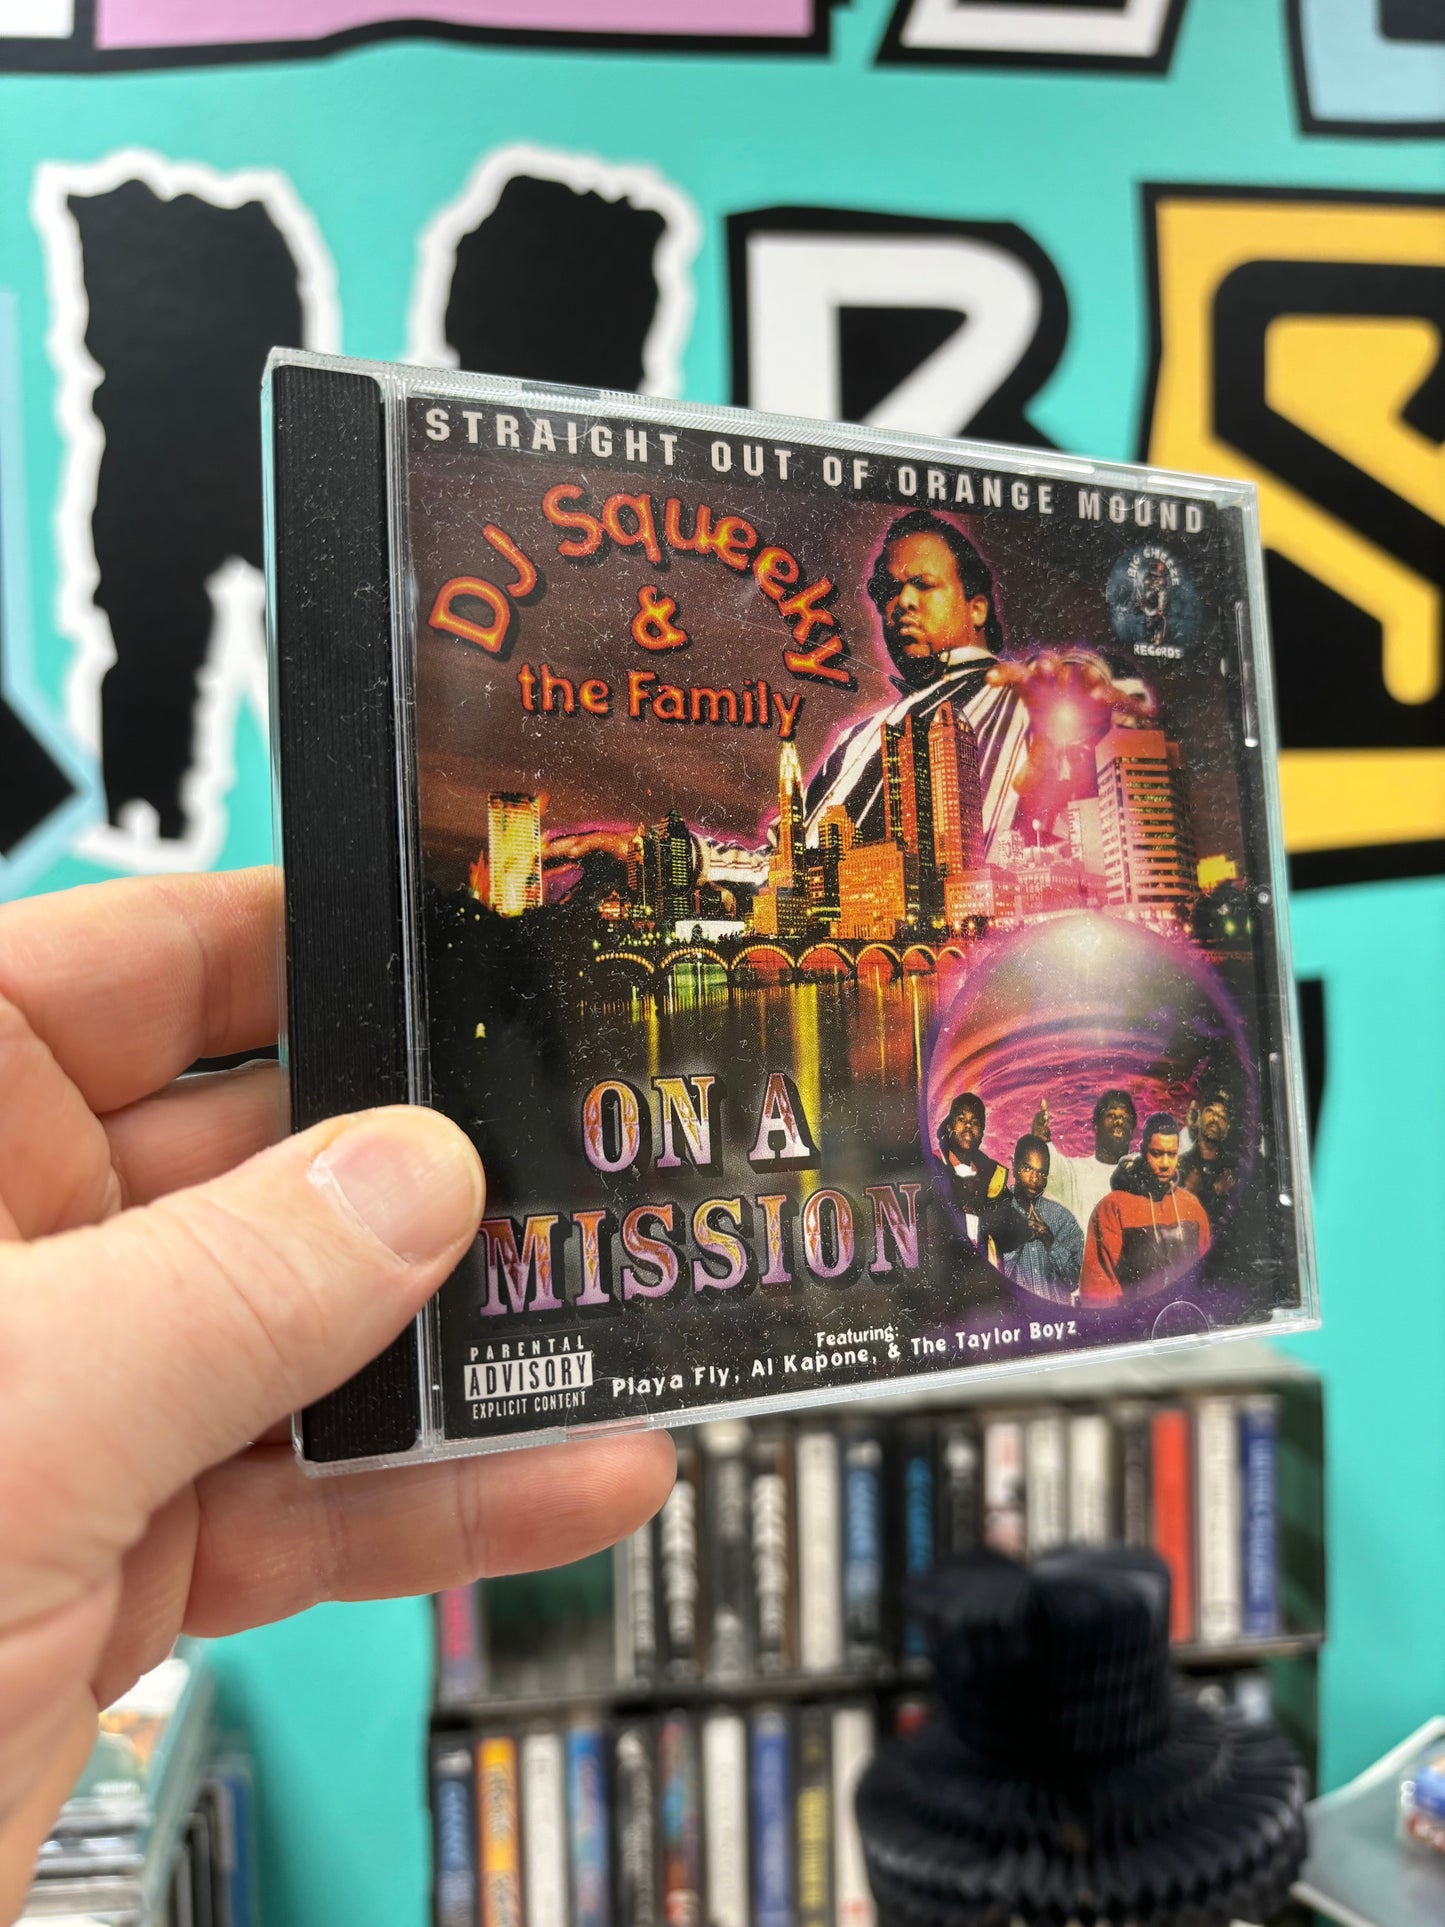 DJ Squeeky & The Family: On A Mission, CD, 1st pressing, Only CD pressing, US 1997